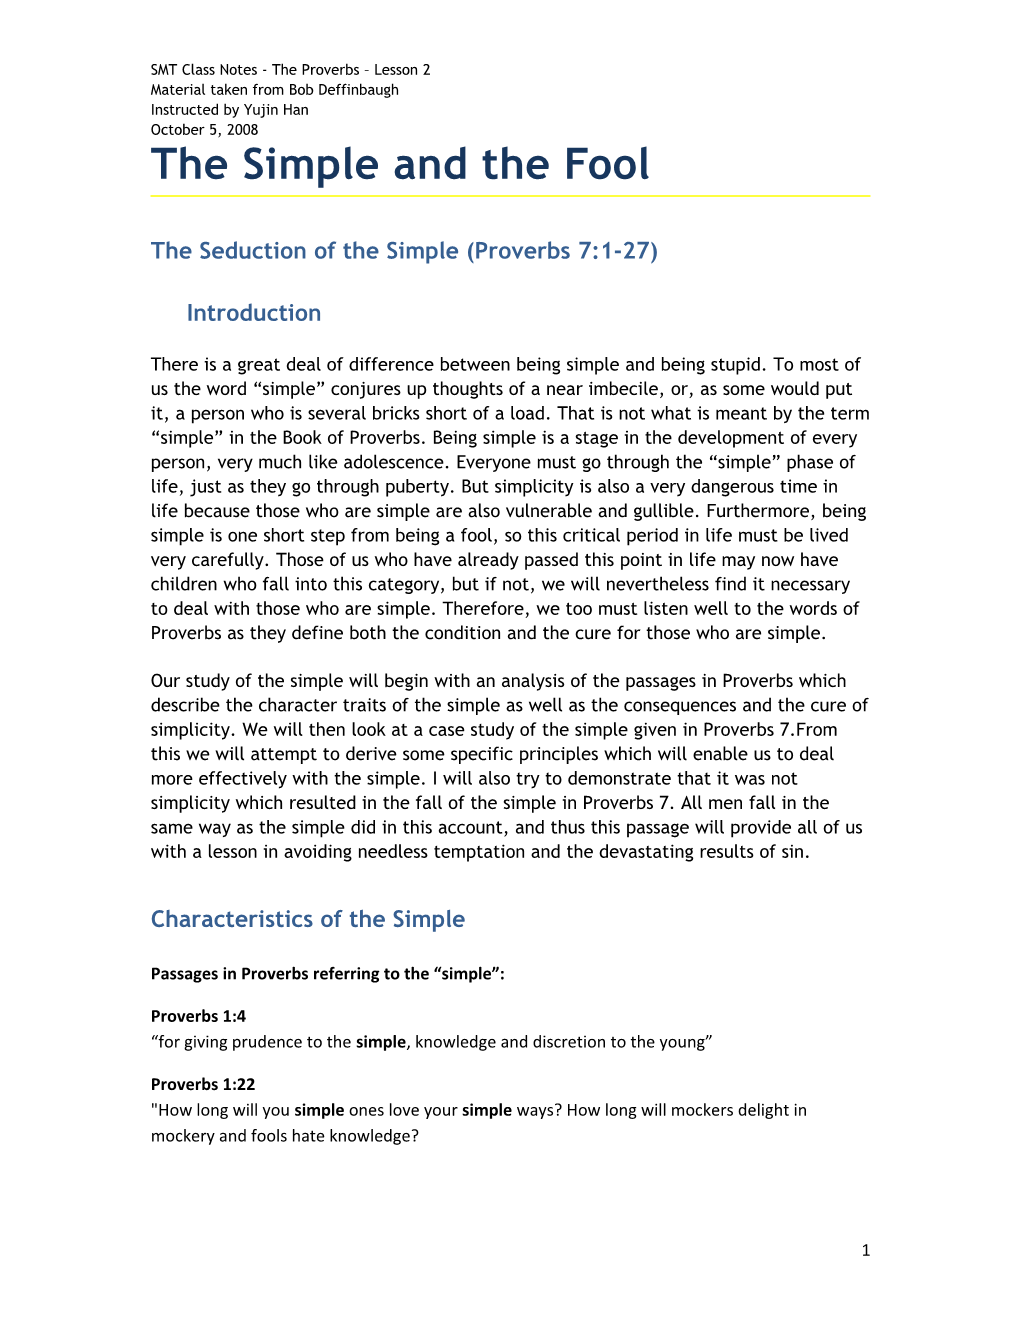 The Simple and the Fool